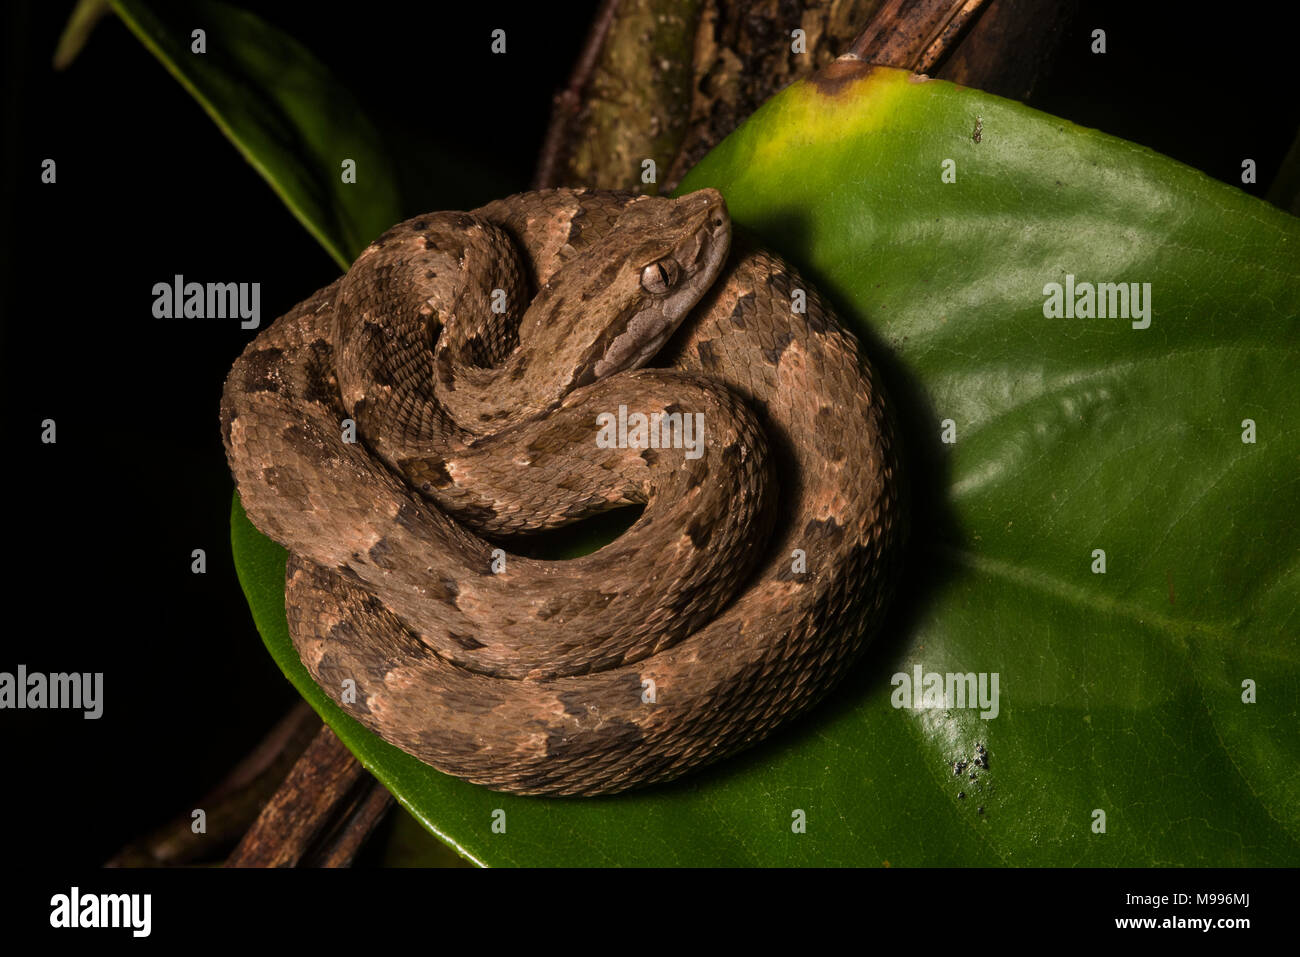 The common lancehead (Bothrops atrox) is the most dangerous snake in South America. It is common and has potent venom and encounters are frequent. Stock Photo